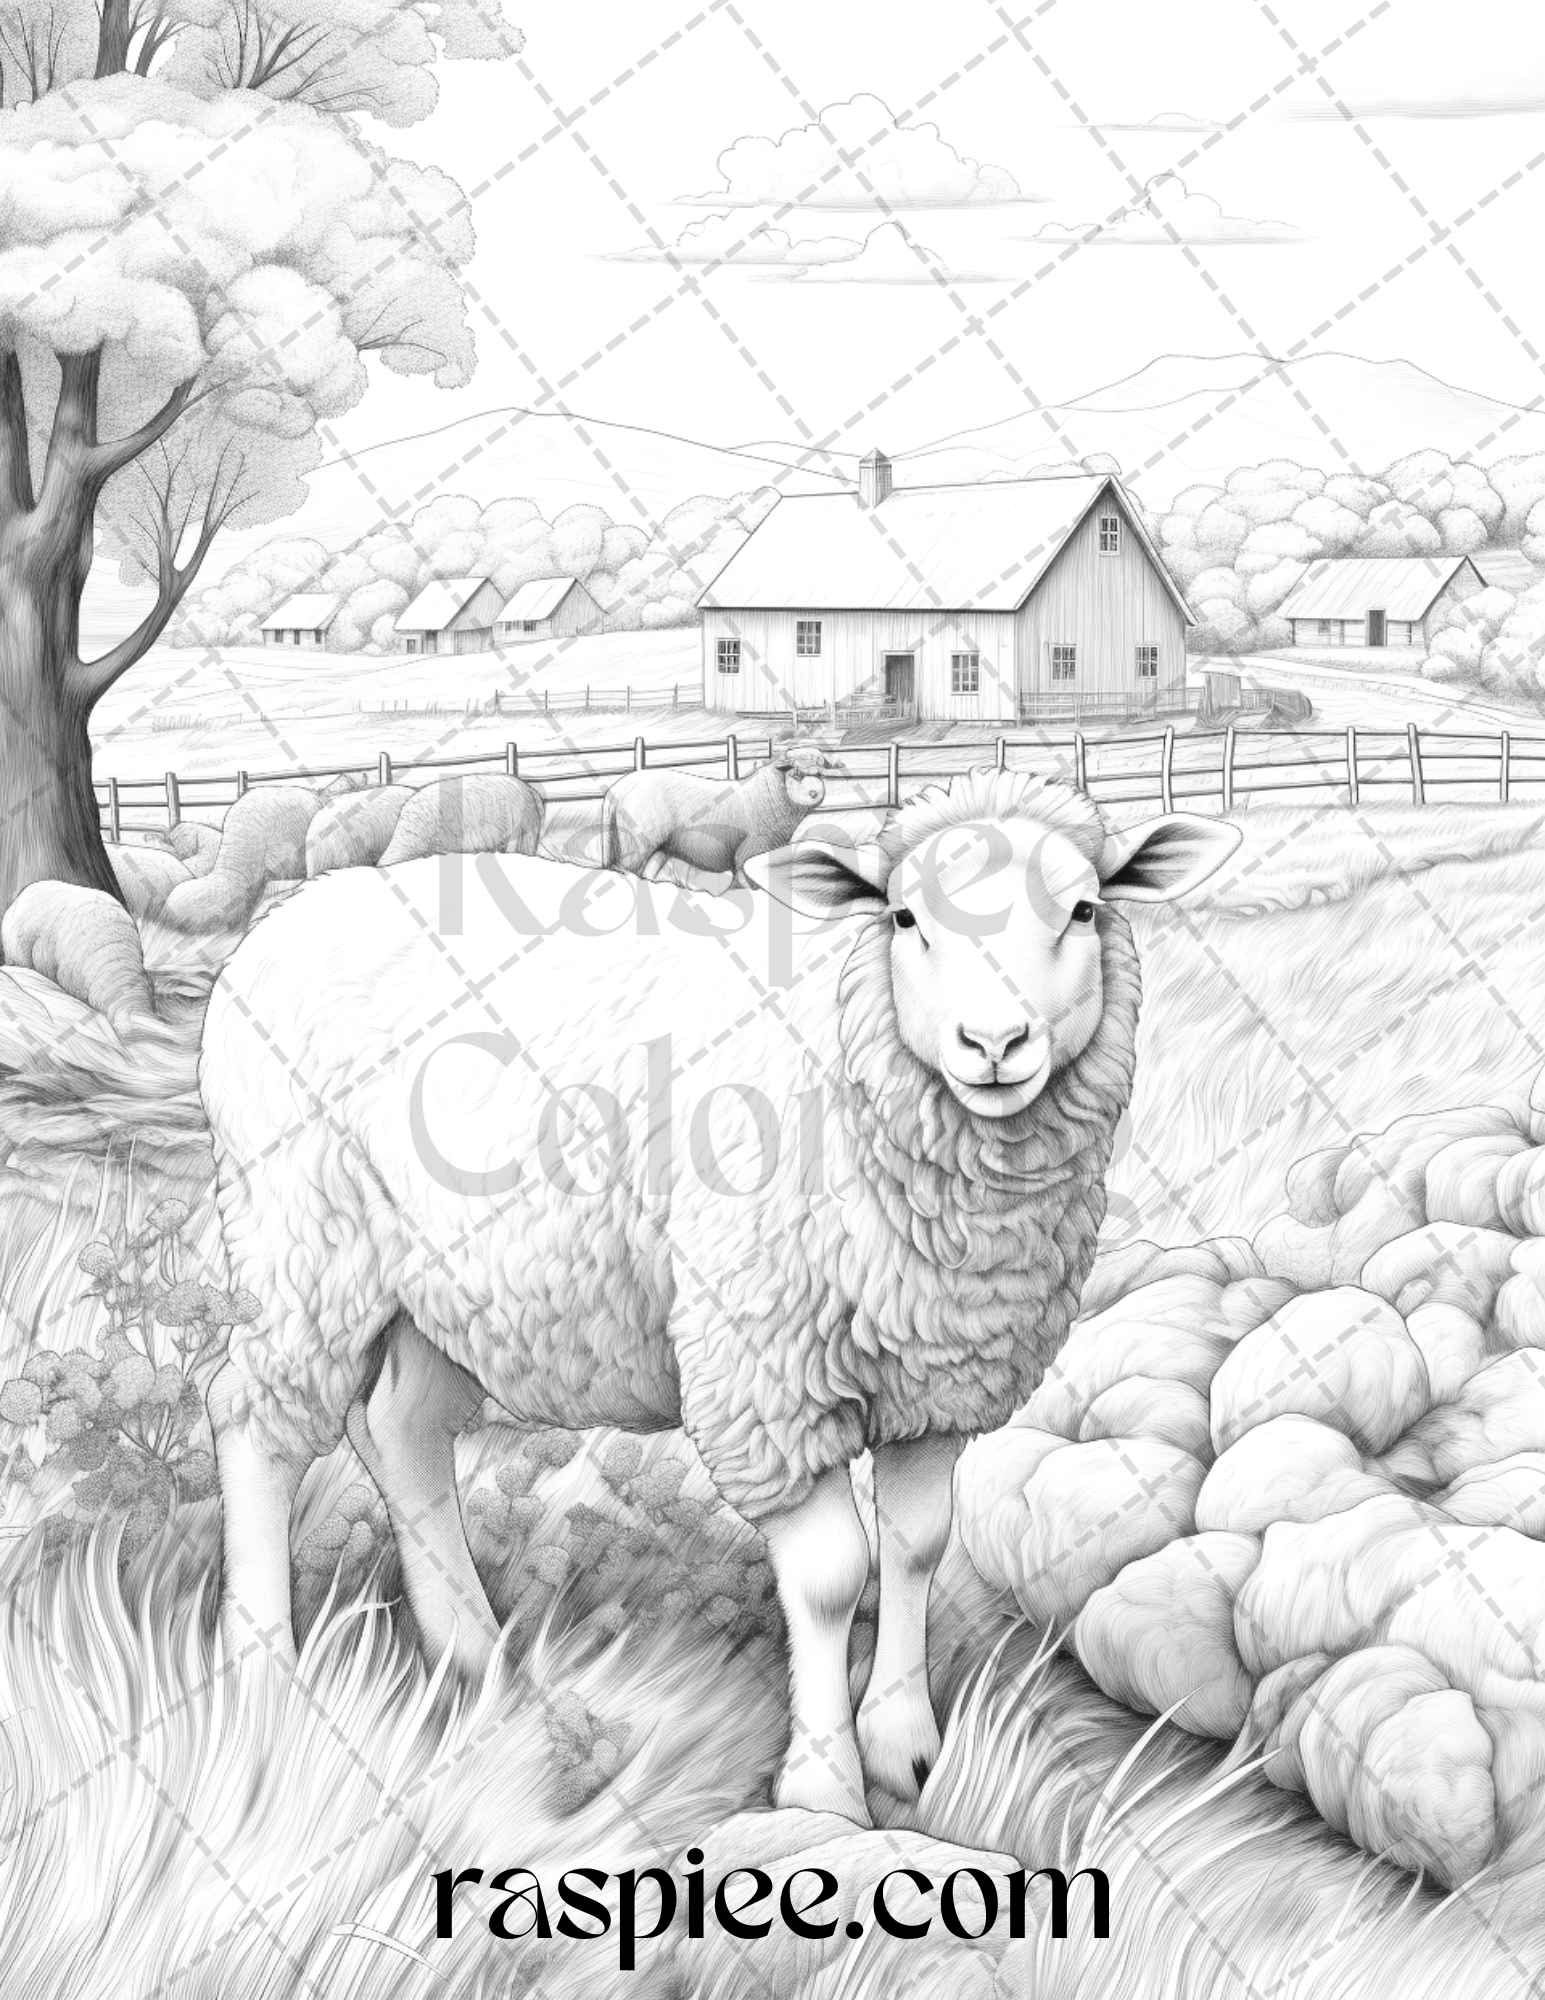 Farmstead serenity grayscale coloring pages printable for adults p â coloring